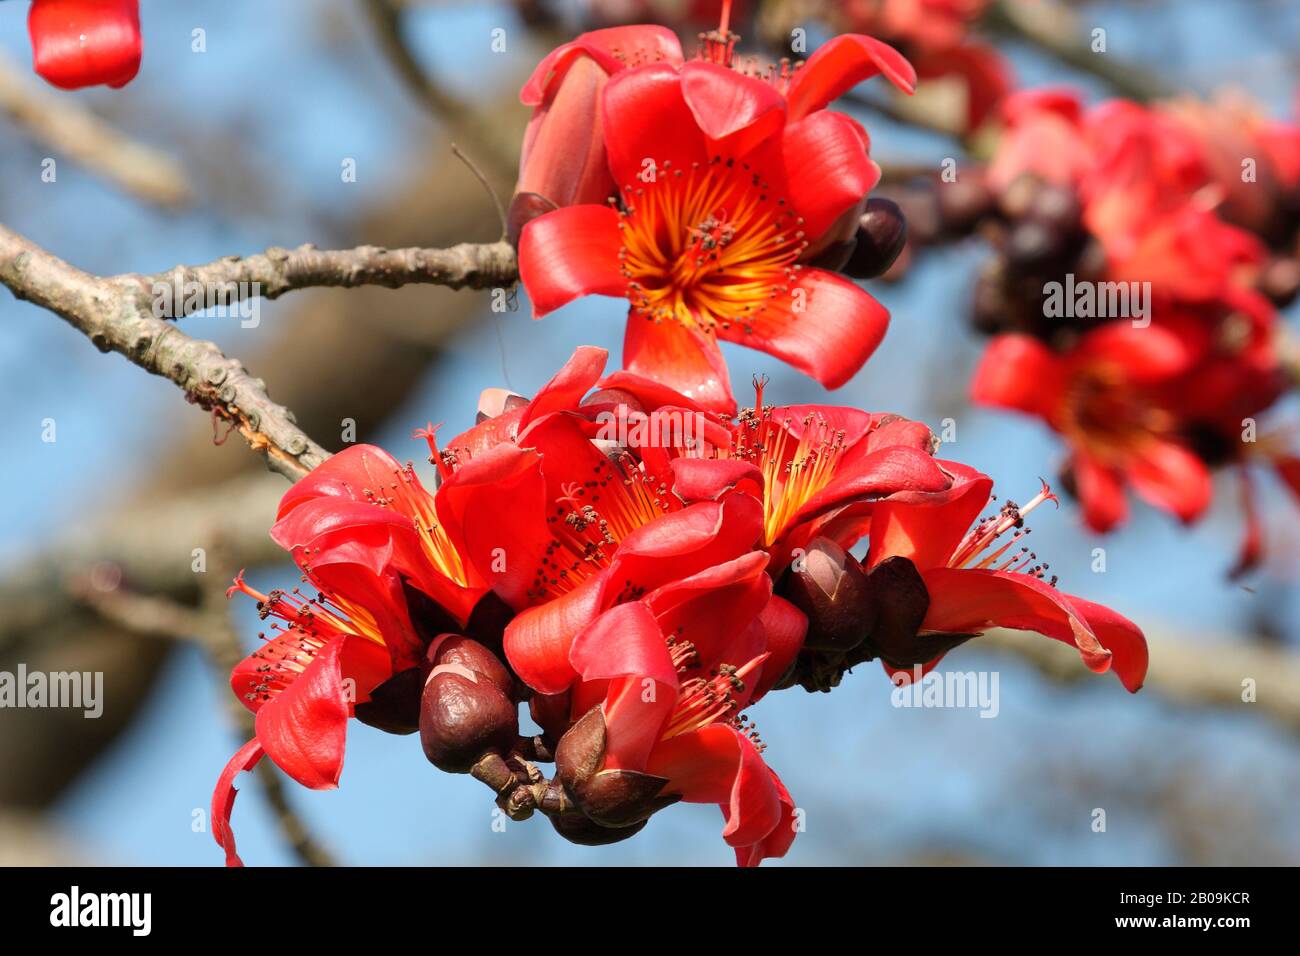 A blossom of red silk cotton flowers (Bombax ceiba) or Shimul, during spring in Narshingdi, Bangladesh. February 28, 2011. Stock Photo